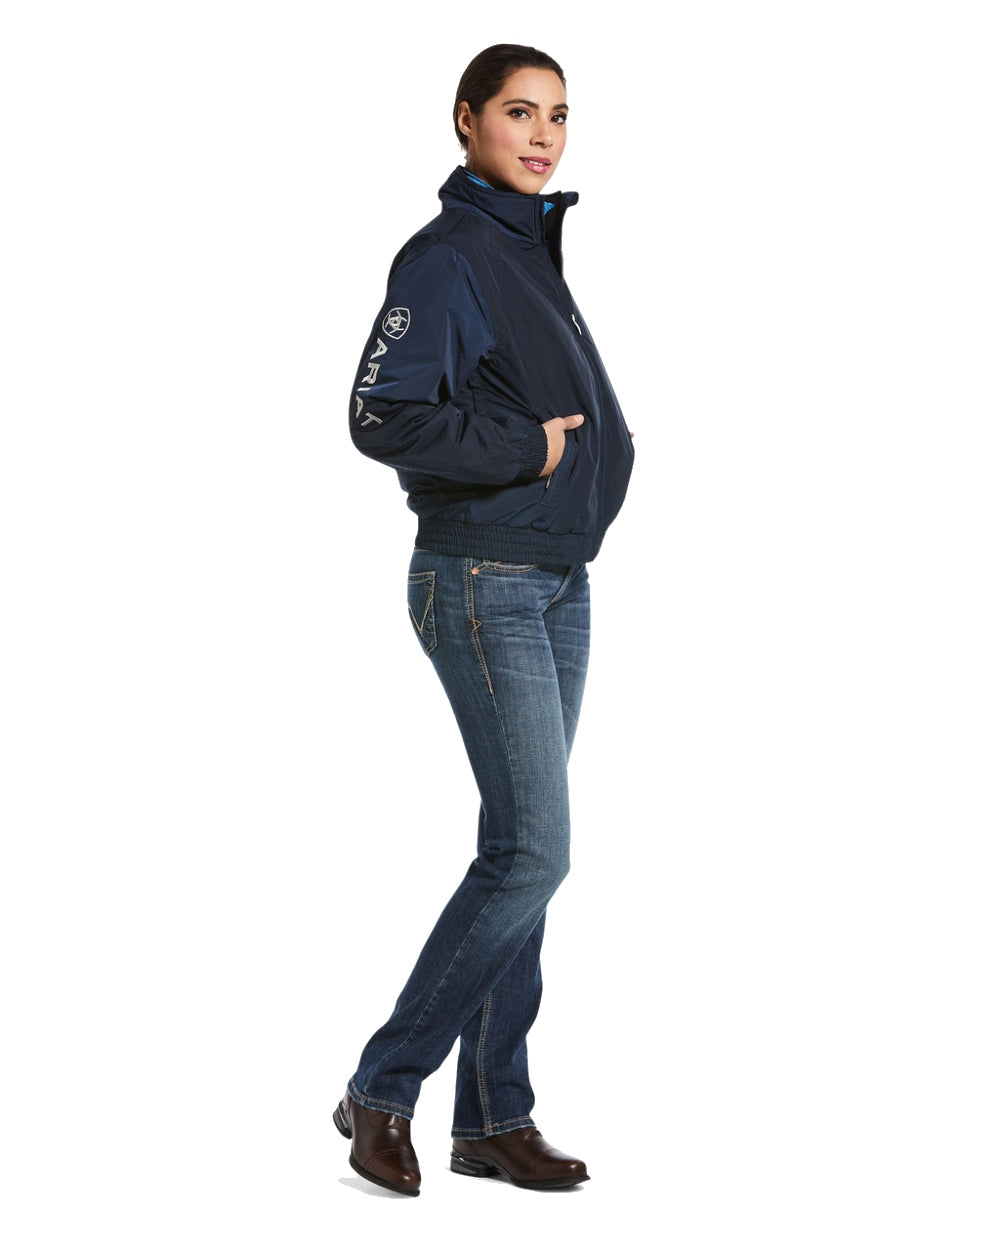 Ariat Womens Stable Insulated Team Jacket in Navy 